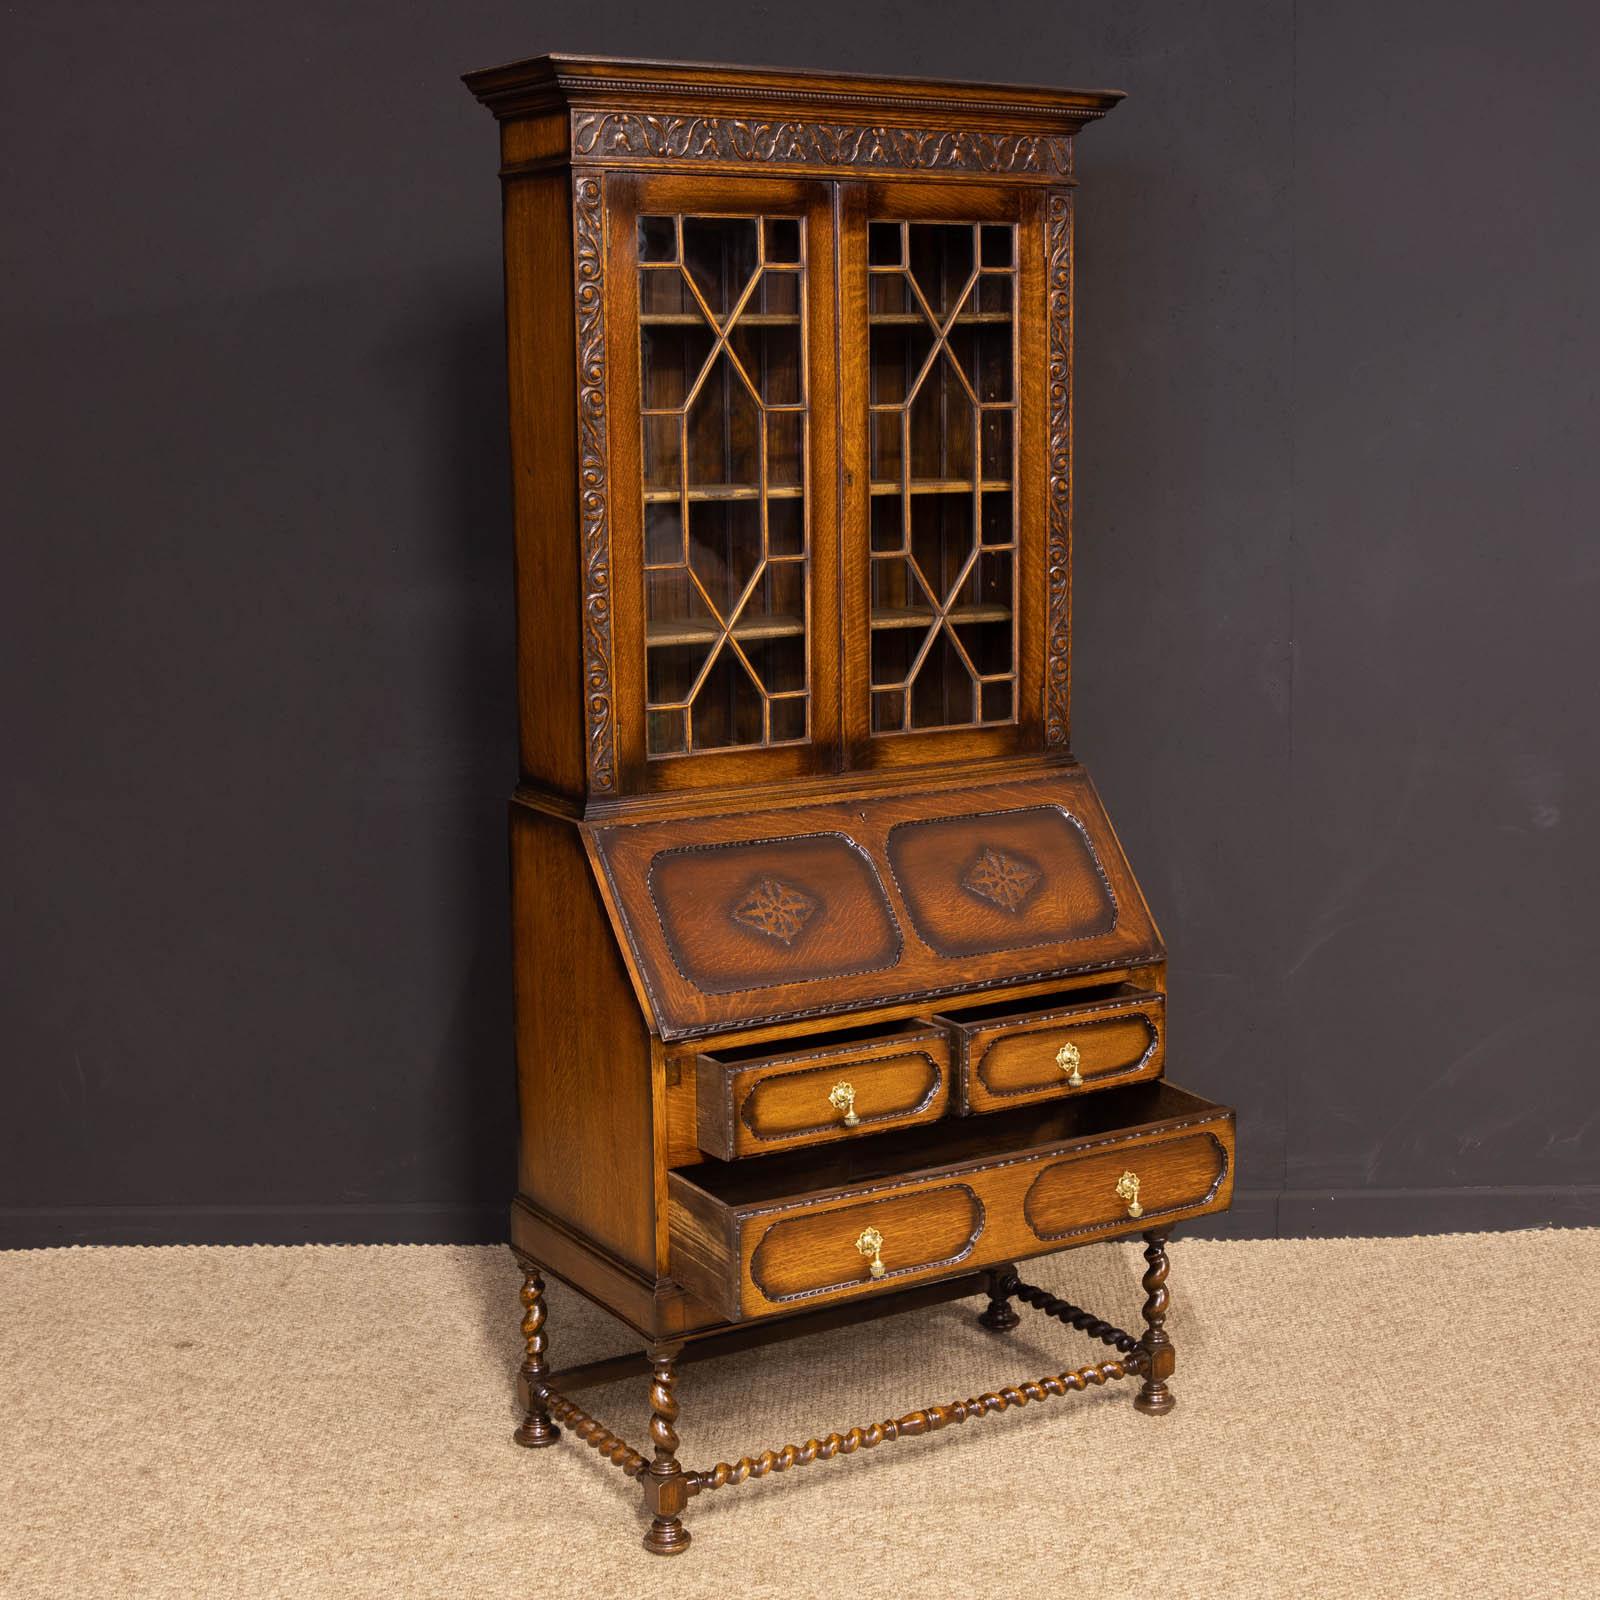 A quality oak bureau bookcase from the 1920s, the turned feet support the twist stretchers and legs above which are one long and two short drawers all with original polished brass knobs. The sloping fall has blind fretwork decoration and inside is a